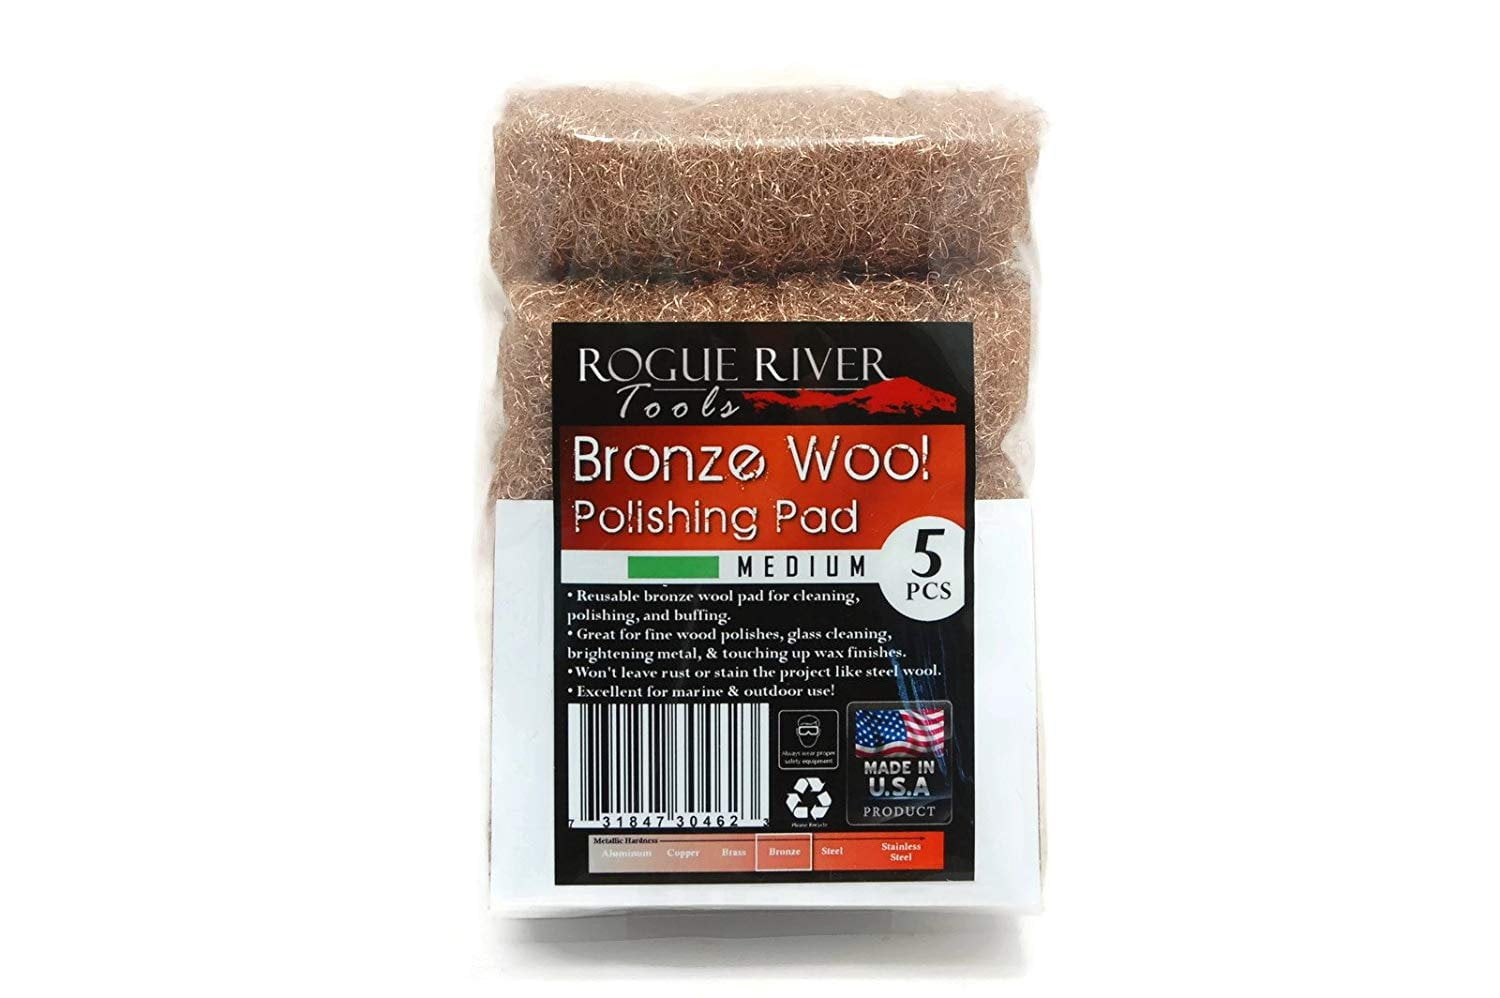 Rogue River Tools Bronze Wool Pads - MEDIUM 5pc CHOOSE GRADE! Marine,  Glass, Wood, IndustrialSoft Touch, No Rust! Made in the USA 